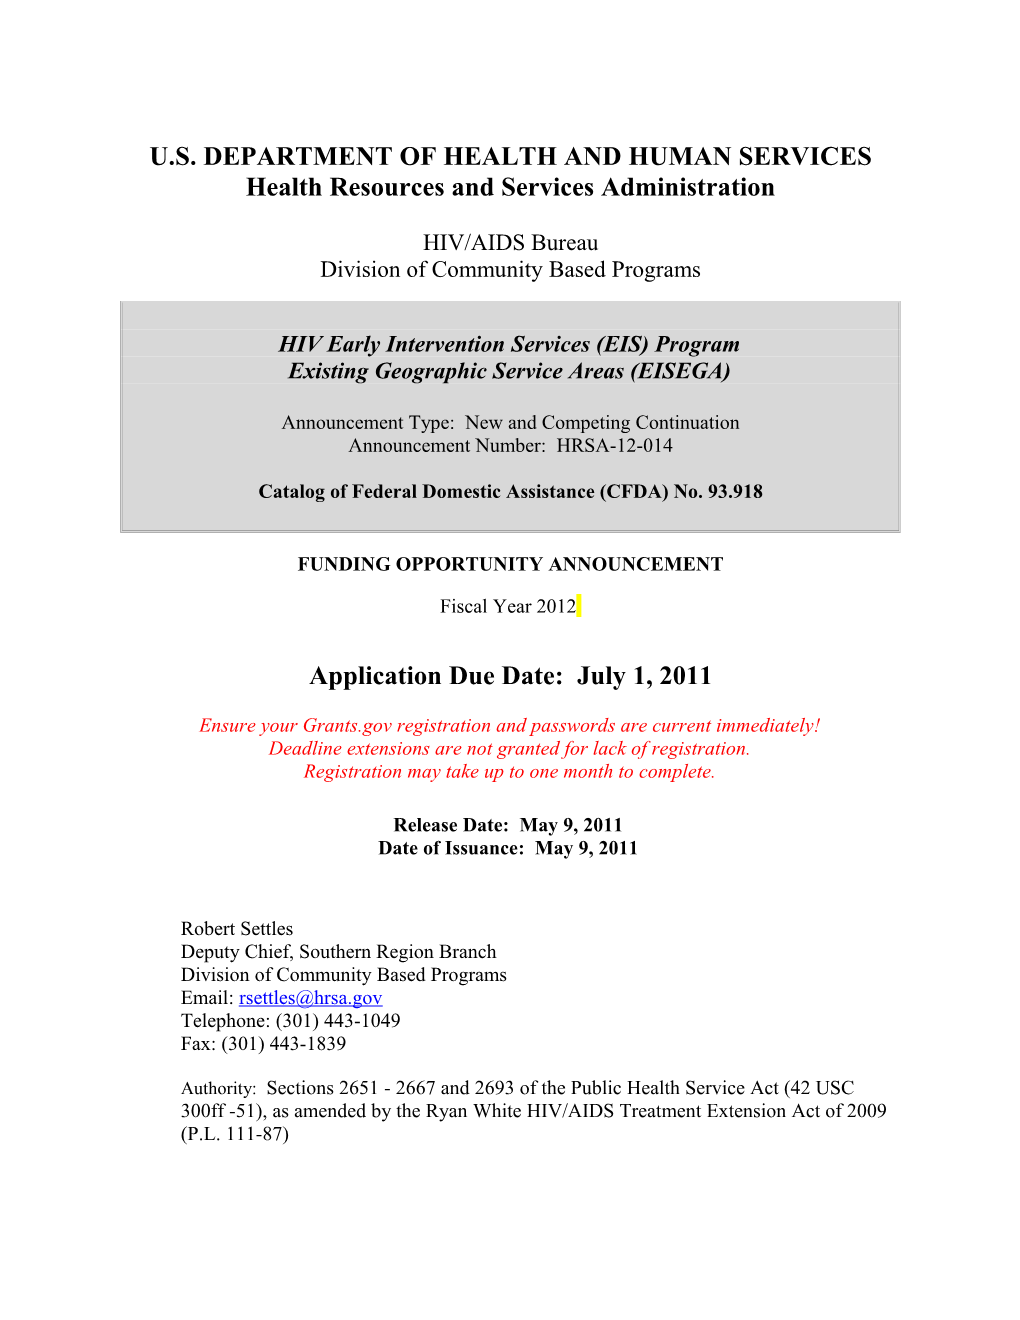 HRSA Funding Opportunity Announcement Template